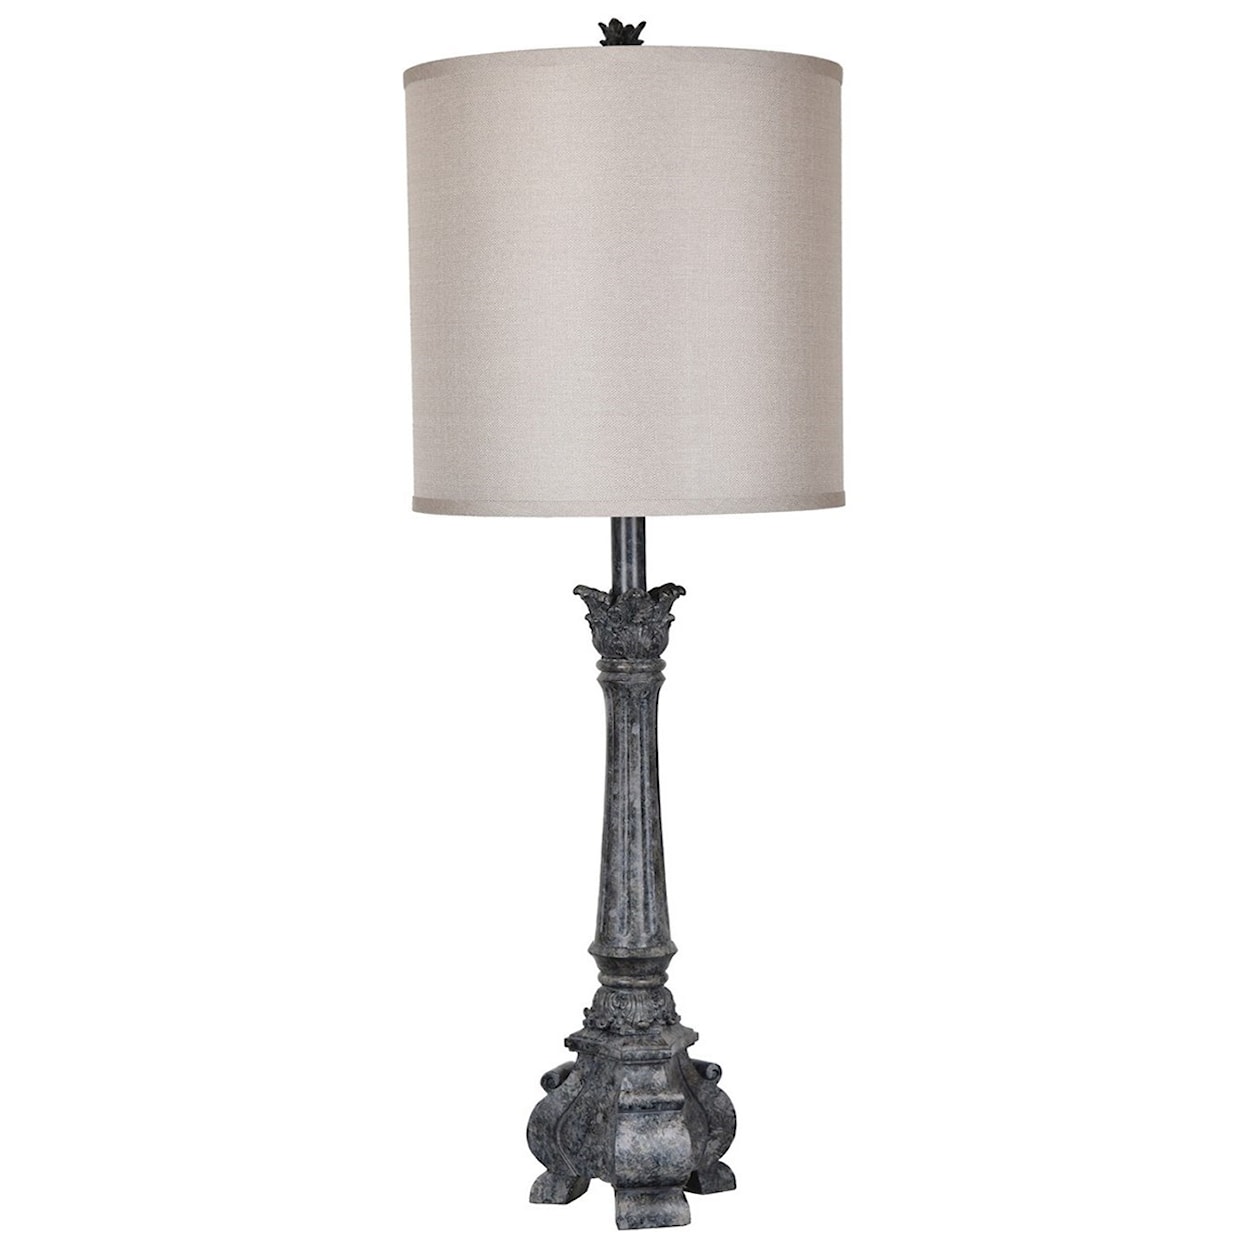 Crestview Collection Lighting Noura Table Lamp